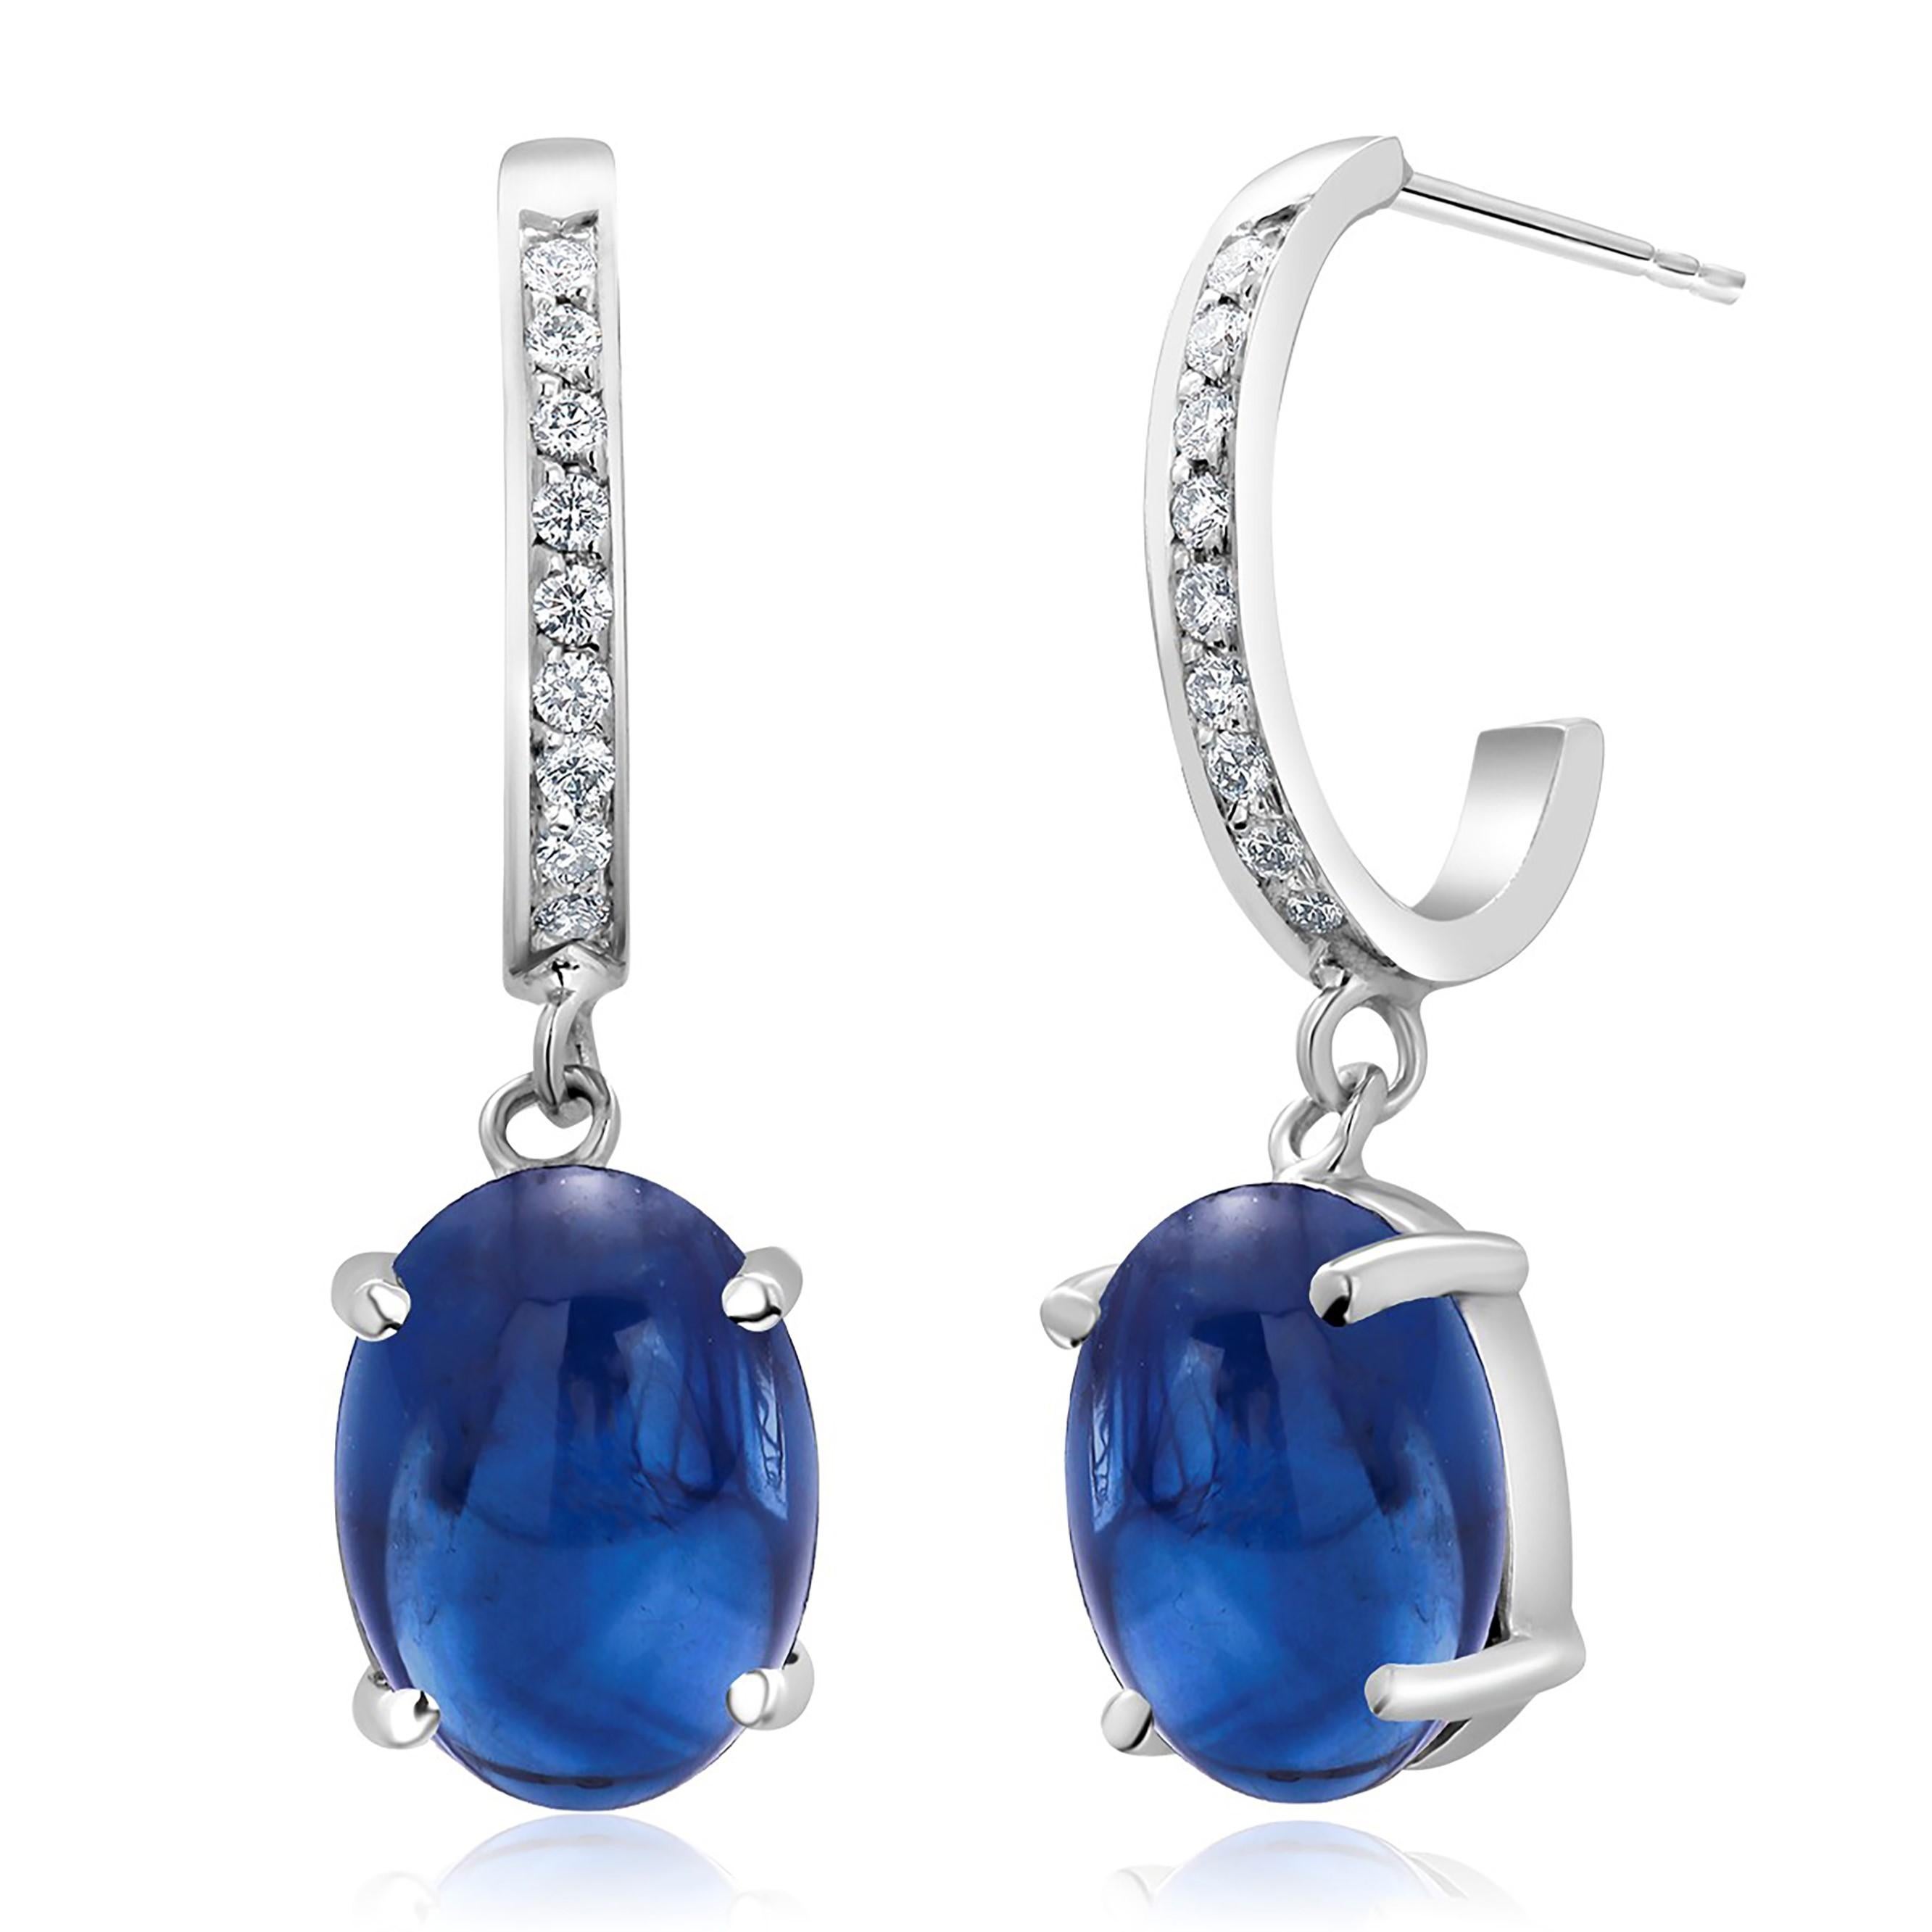 Oval Cut Cabochon Sapphire and Diamond Gold Hoop Earrings Weighing 6.23 Carats